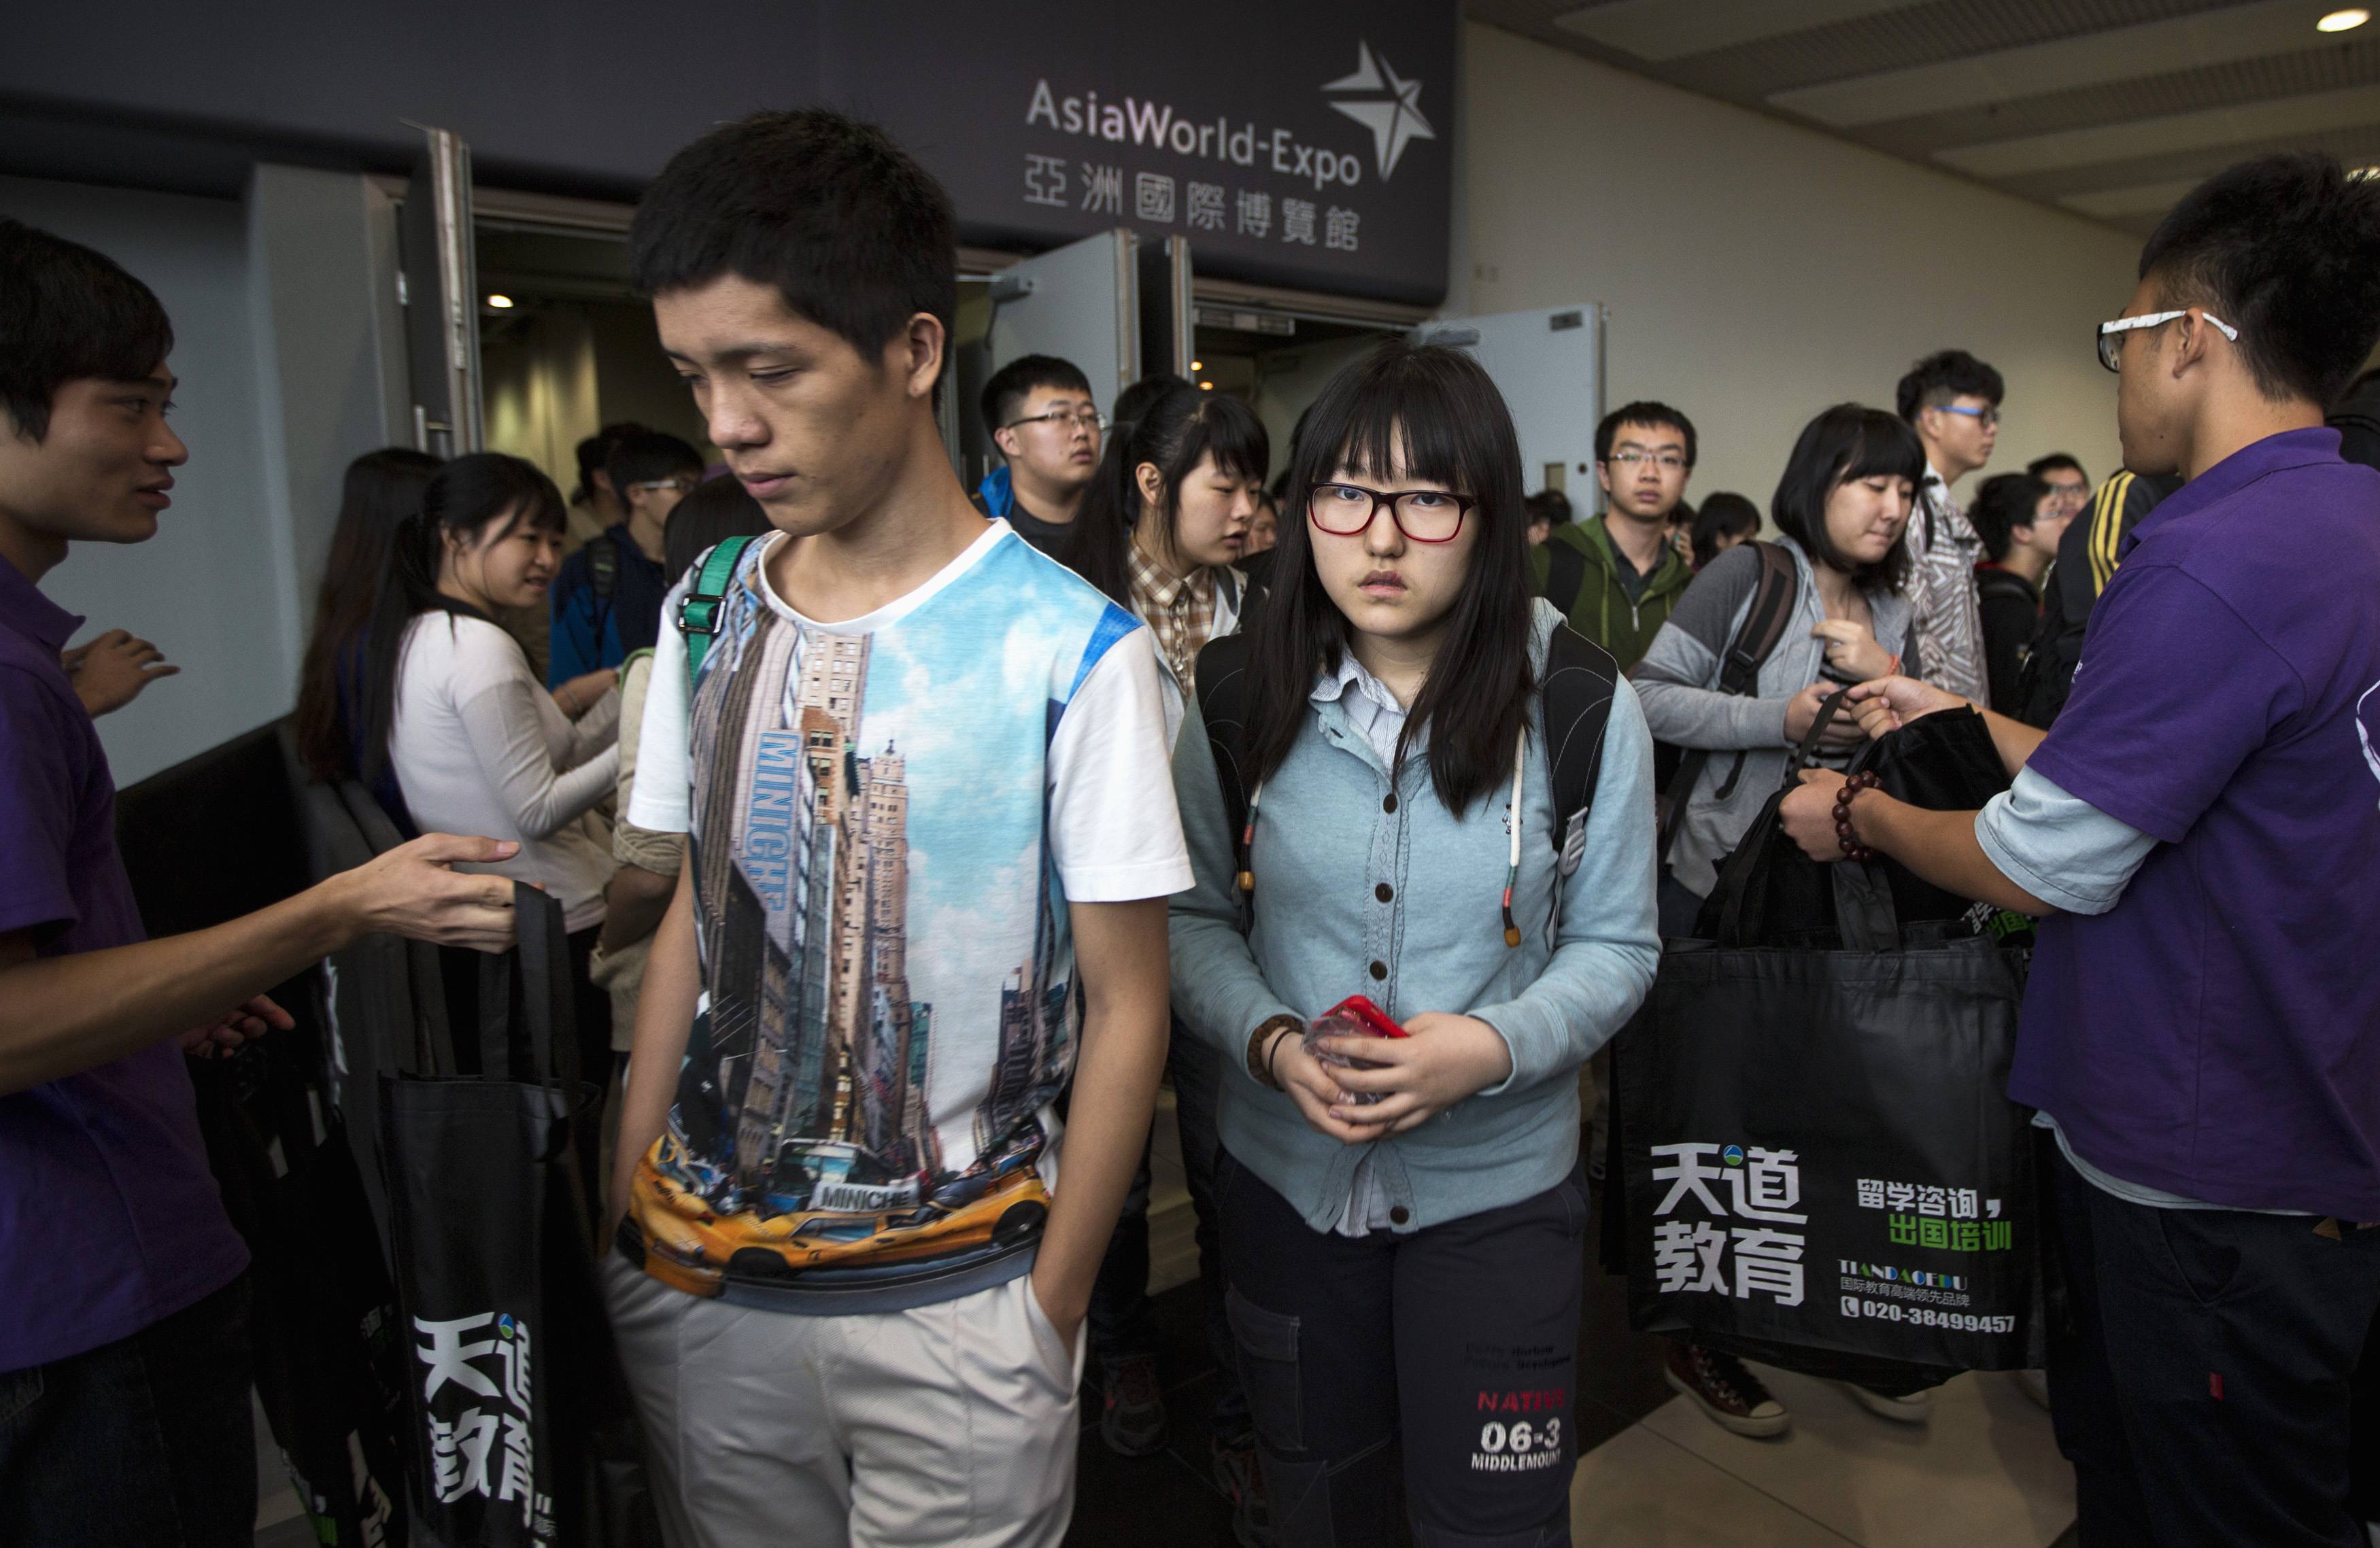 More than 10,000 candidates sat for the SAT at AsiaWorld-Expo in Hong Kong last November, over 90 per cent of them from the mainland. Photo: Reuters